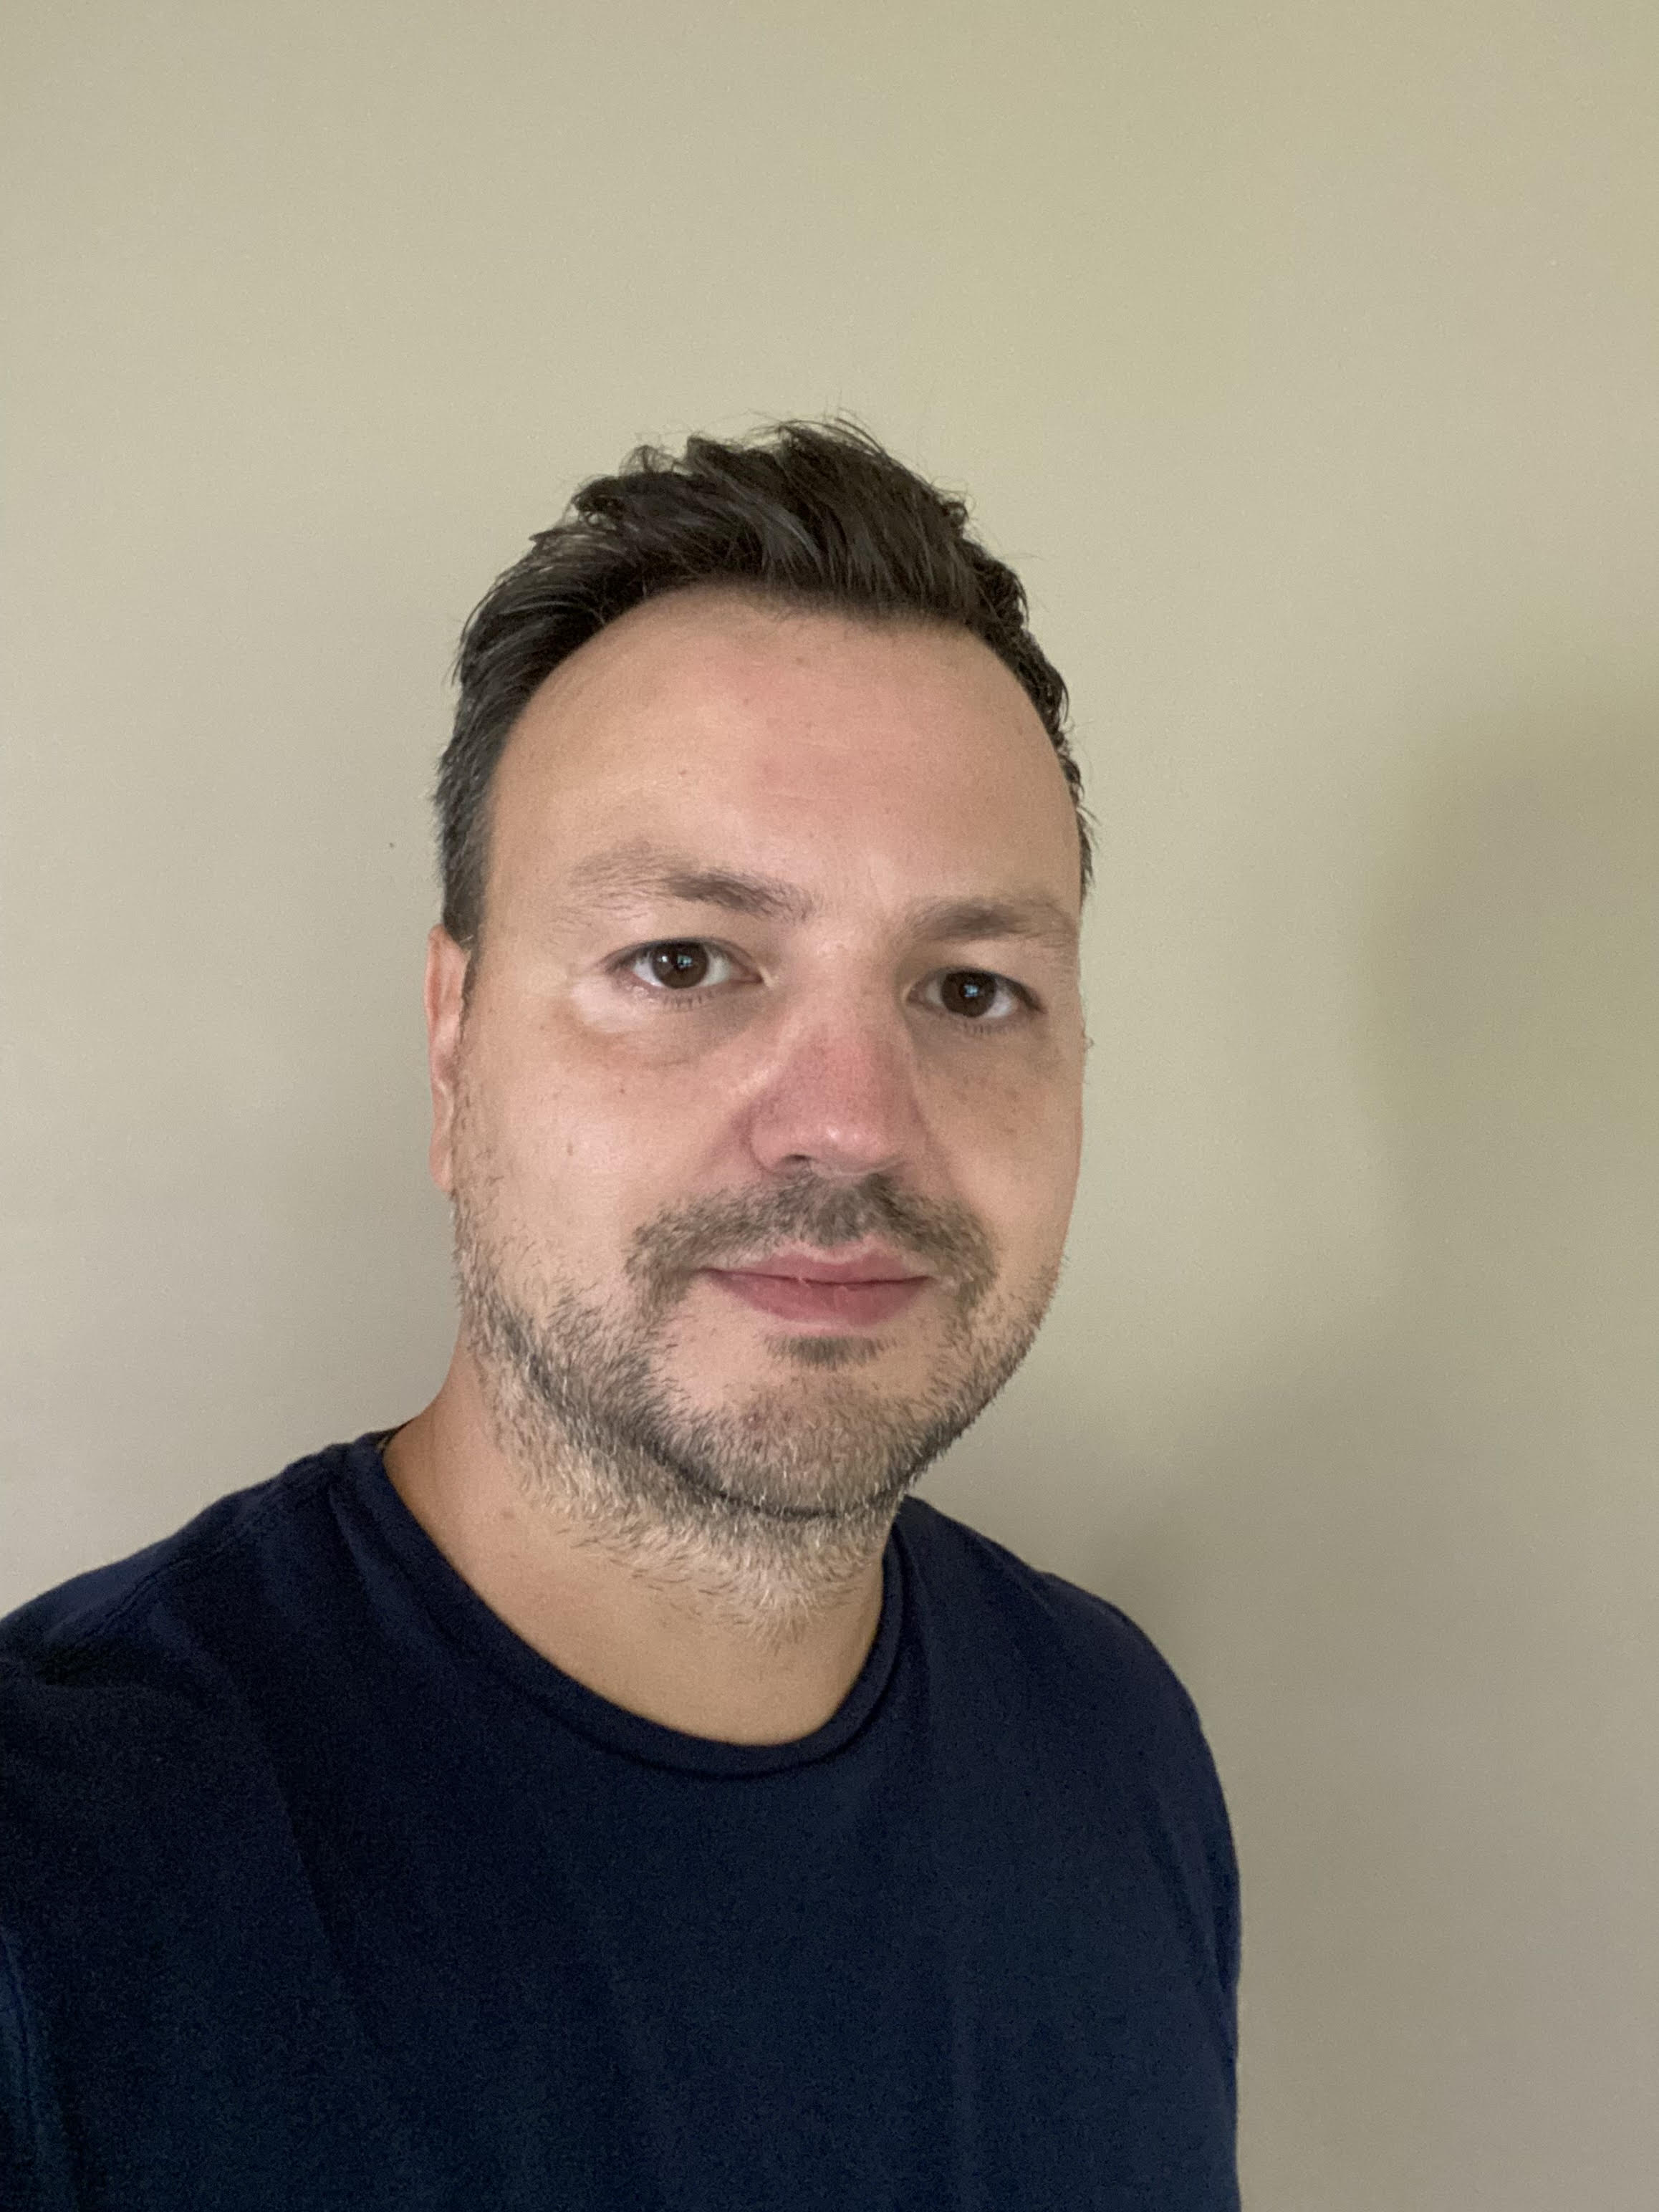 Marko Jagustin joins Exness as new Head of Liquidity Provision